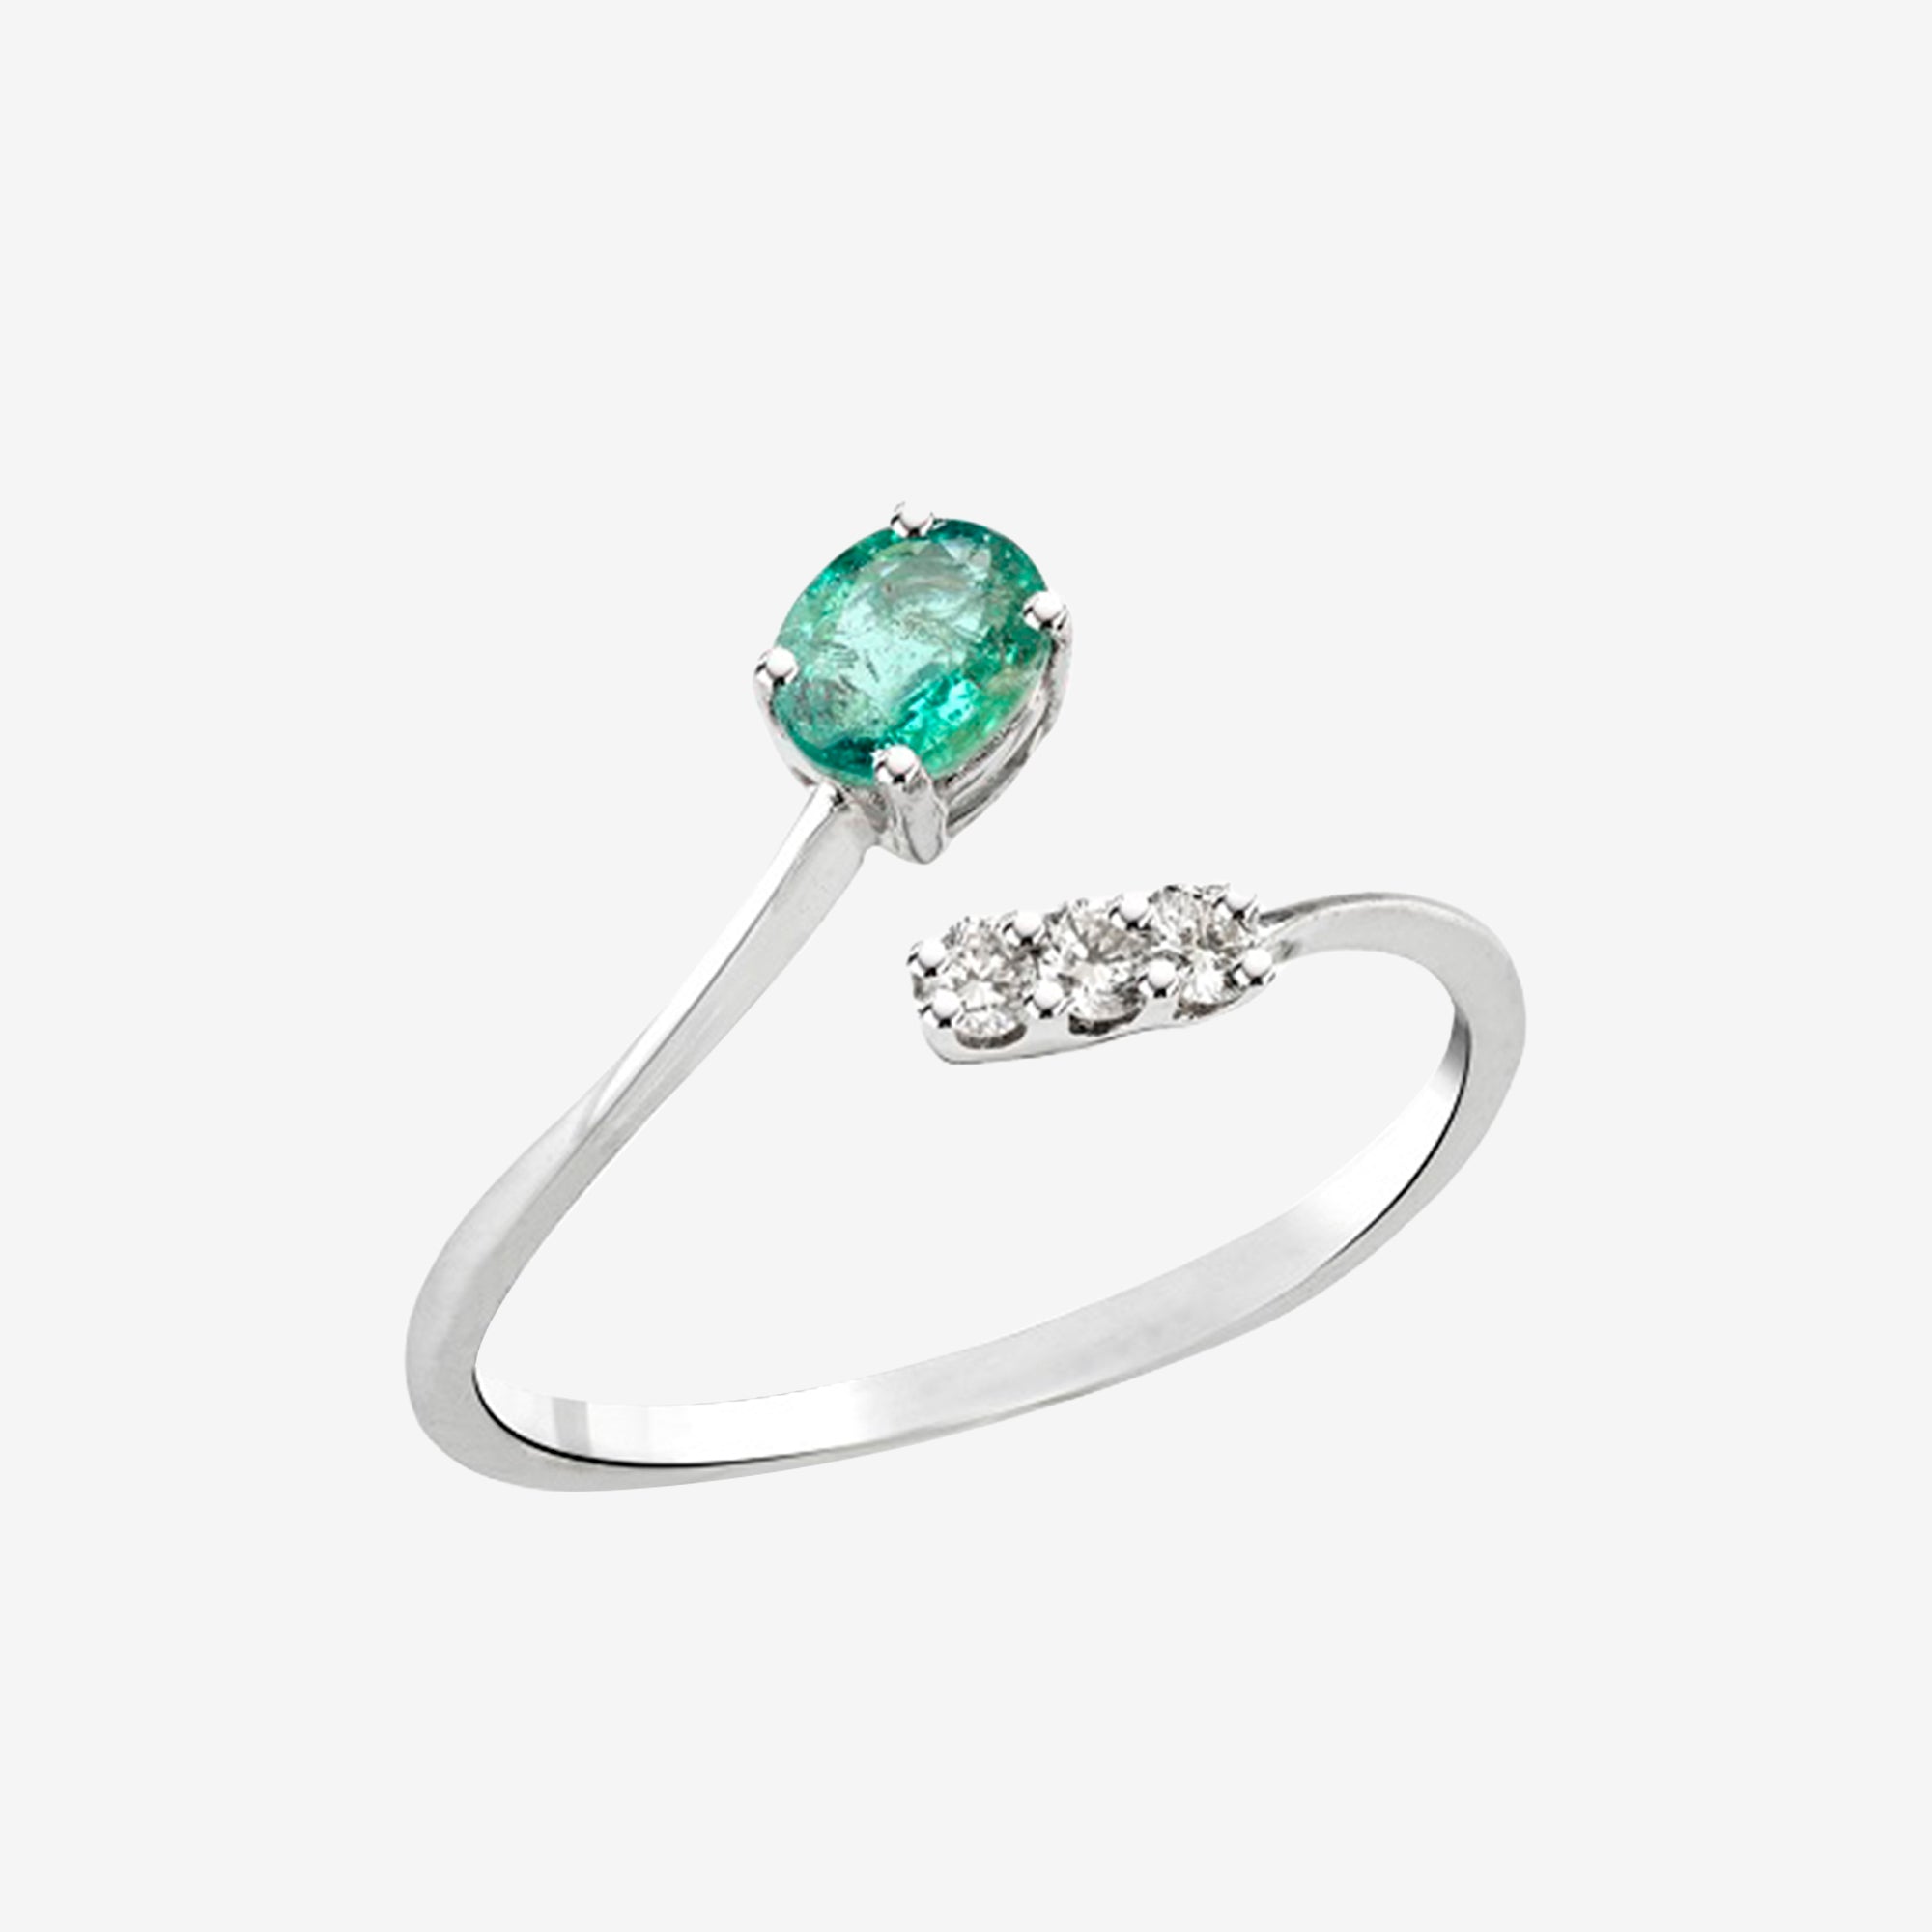 Twisted Emerald ring